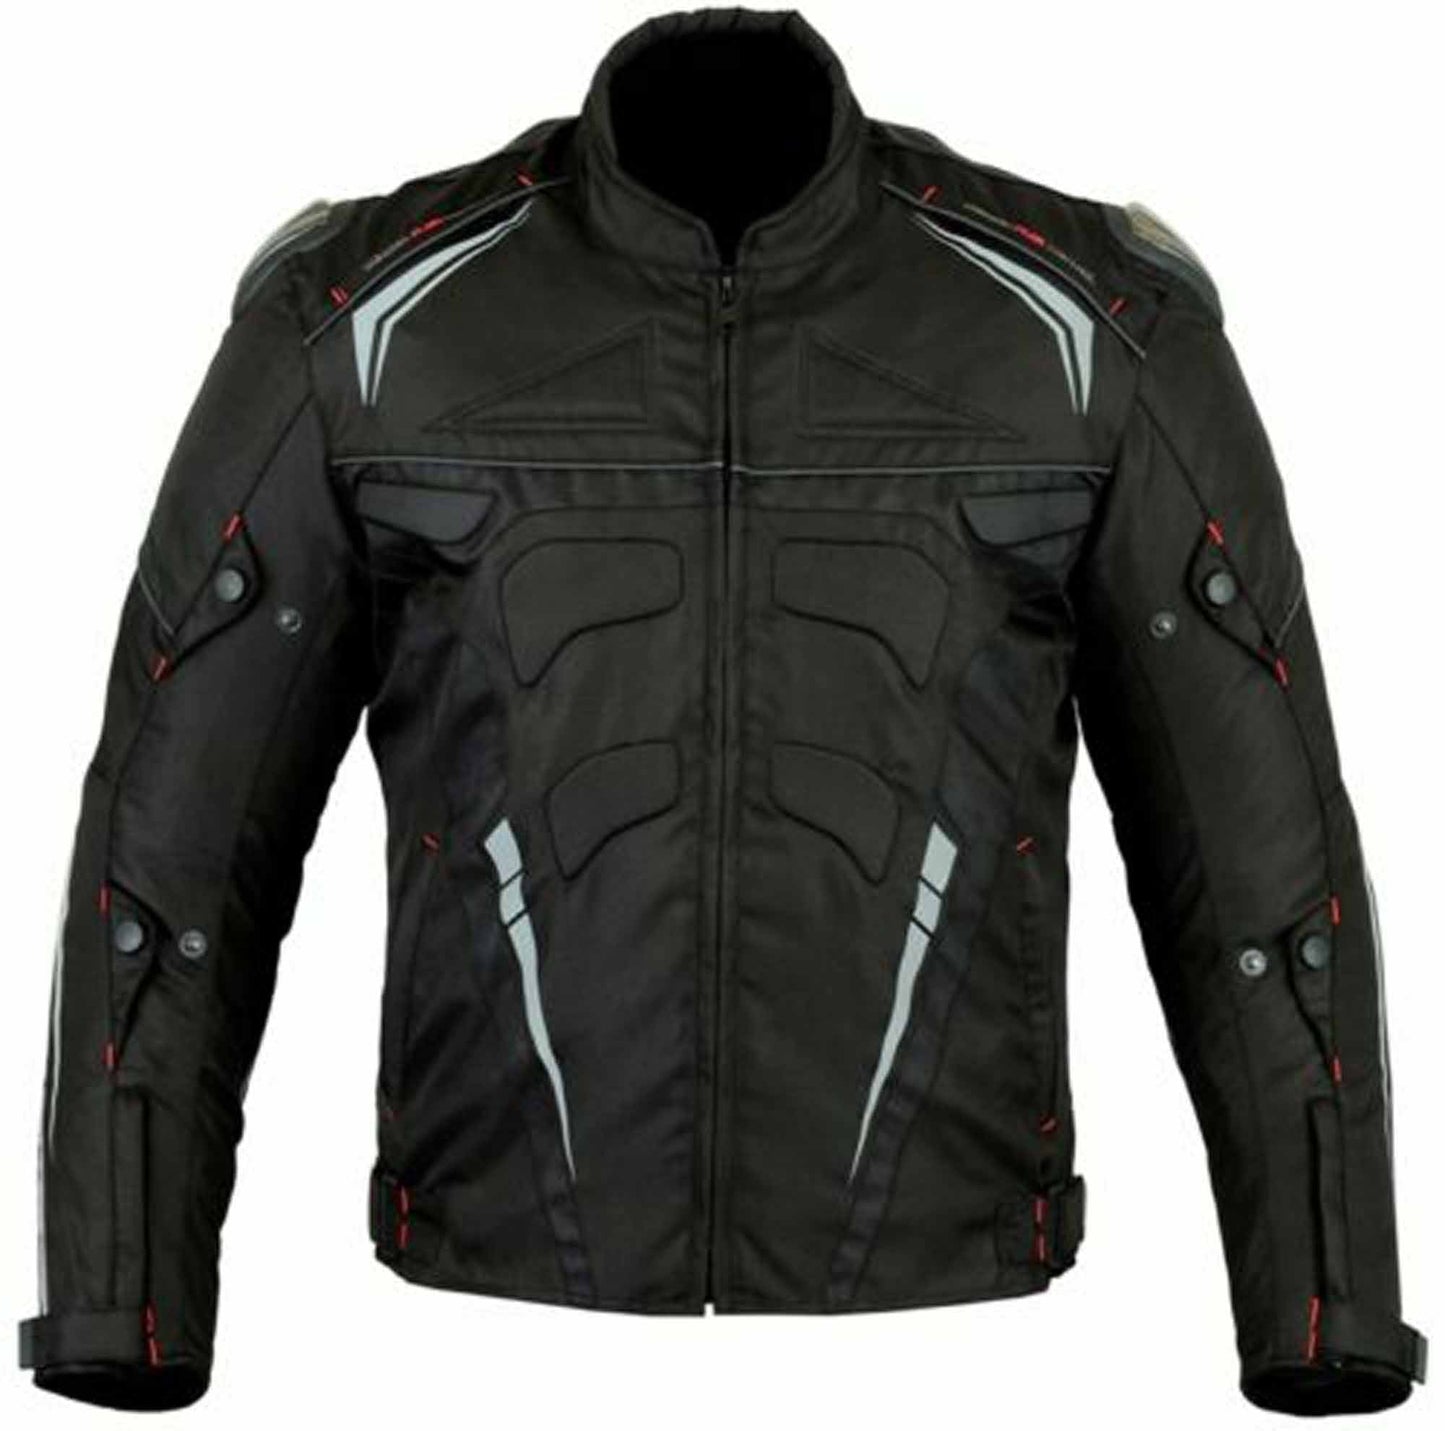 Textile Jacket With Metal Protections & Inside Armor - Waterproof - Unisex